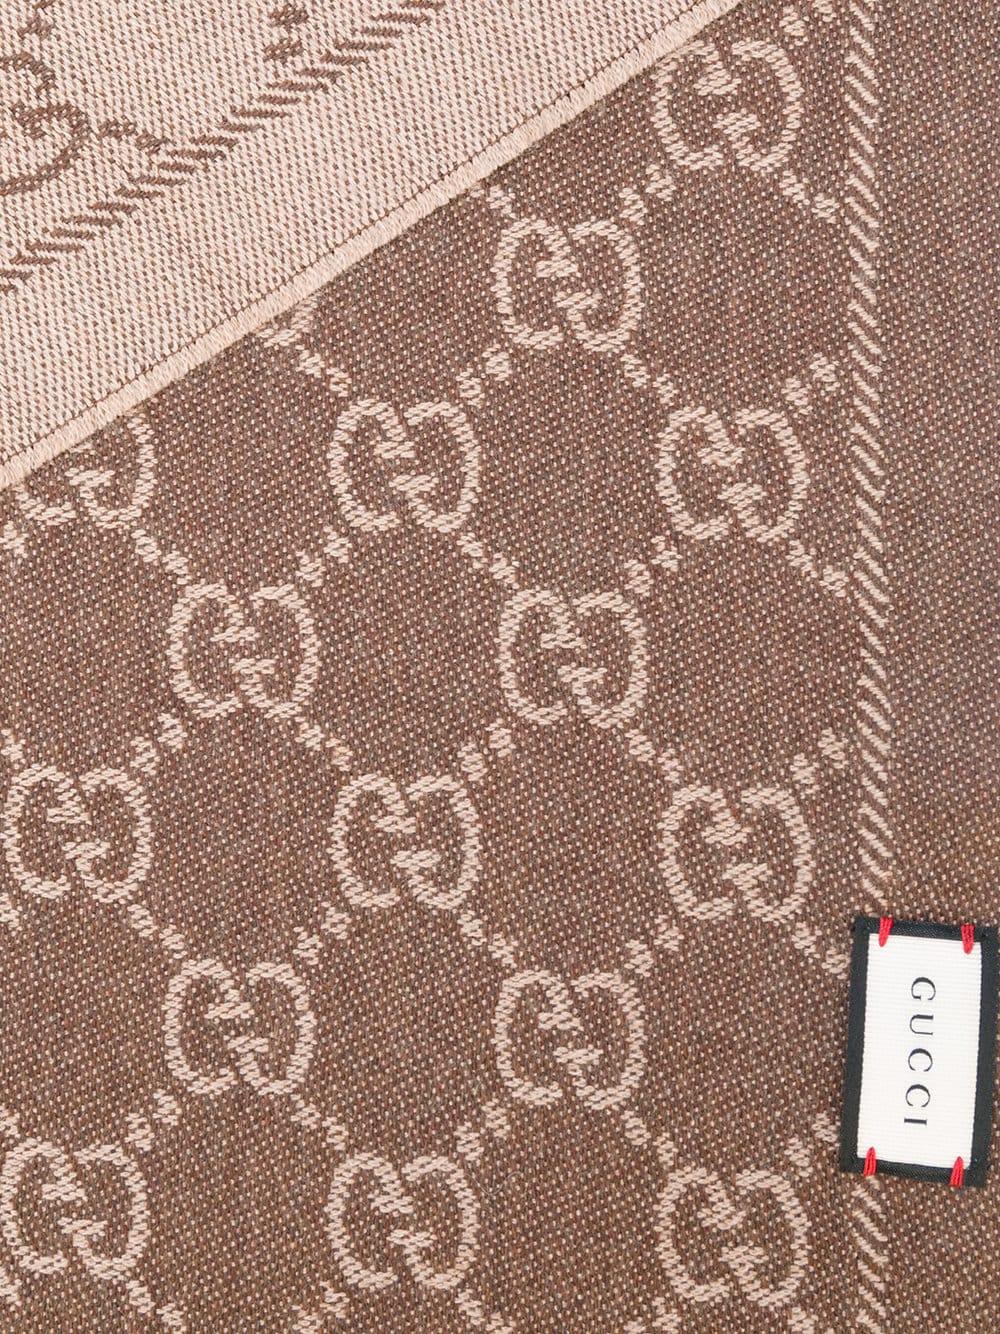 New Authentic GUCCI GG Logo Cotton Jacquard Scarf in Camel/ brown 67×200cm